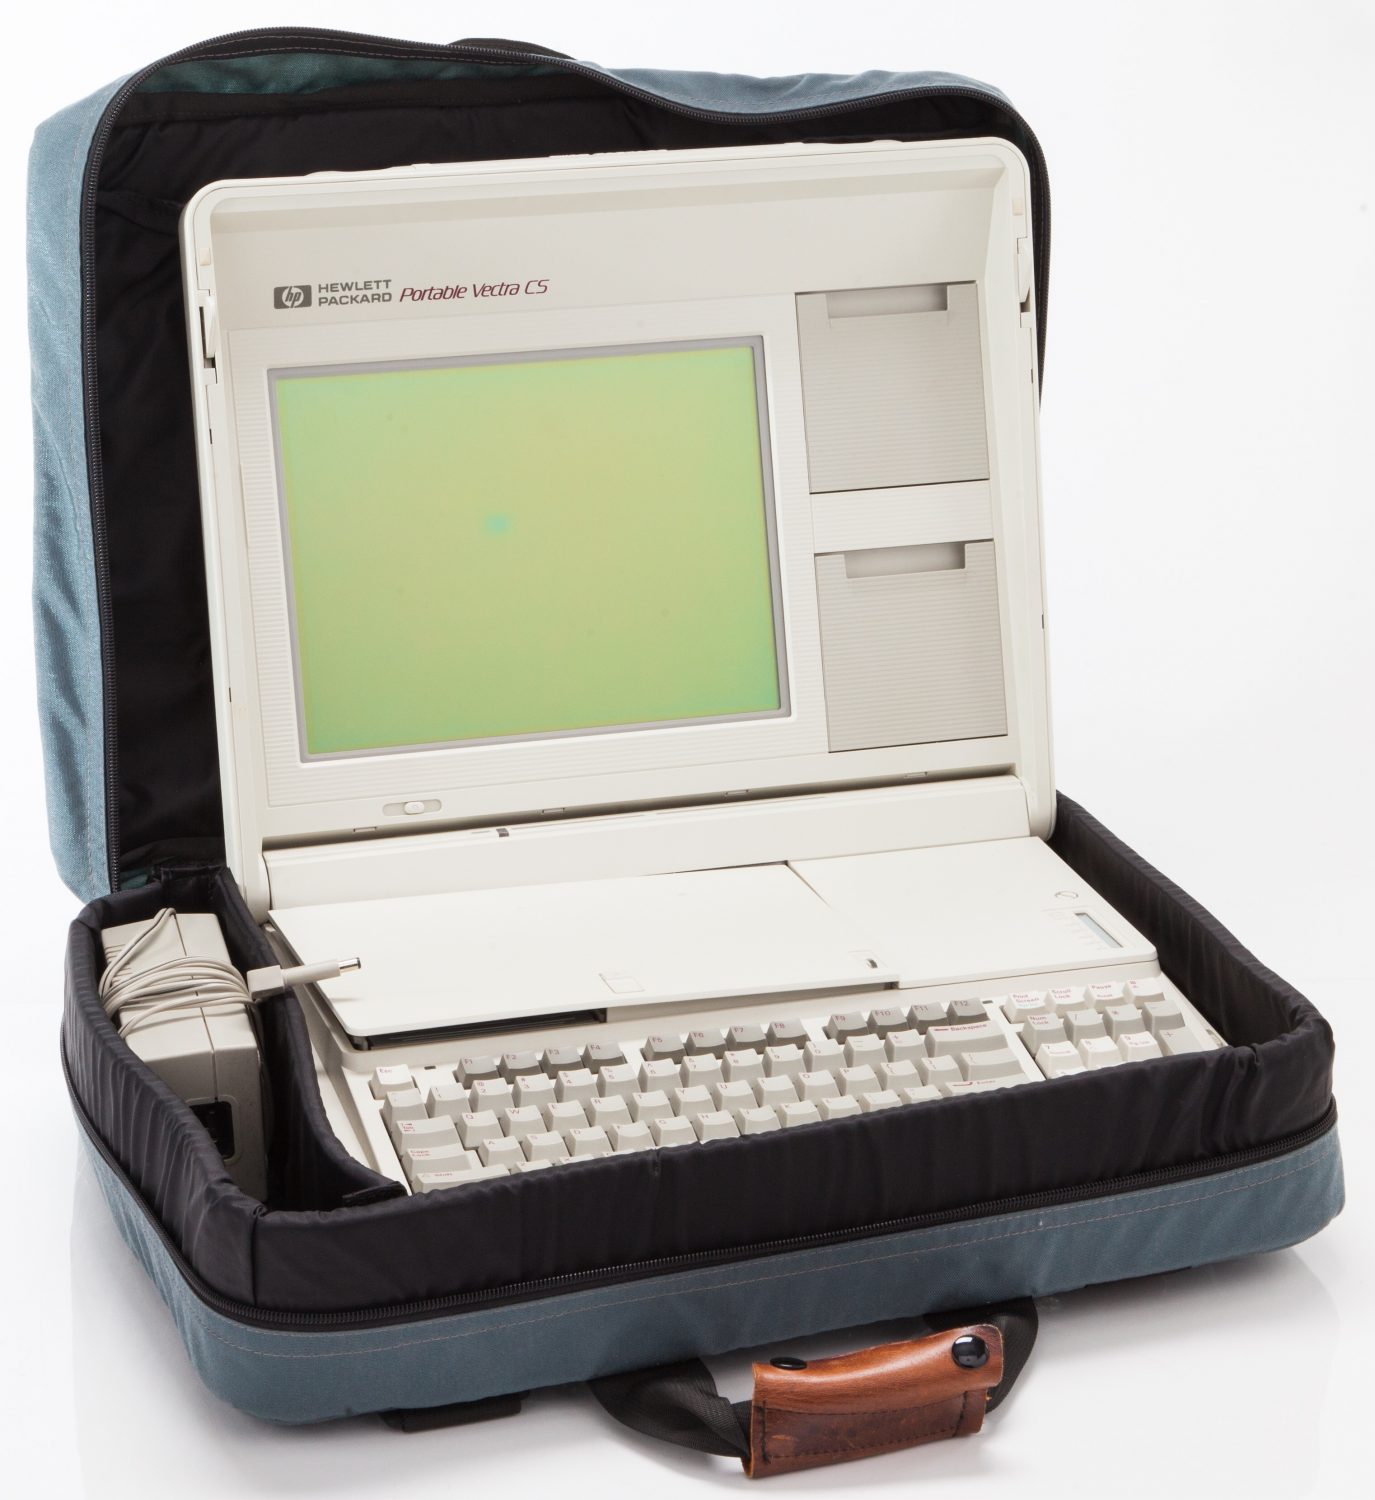 The Hewlett-Packard Vectra portable computer in carrying case with power adapter.